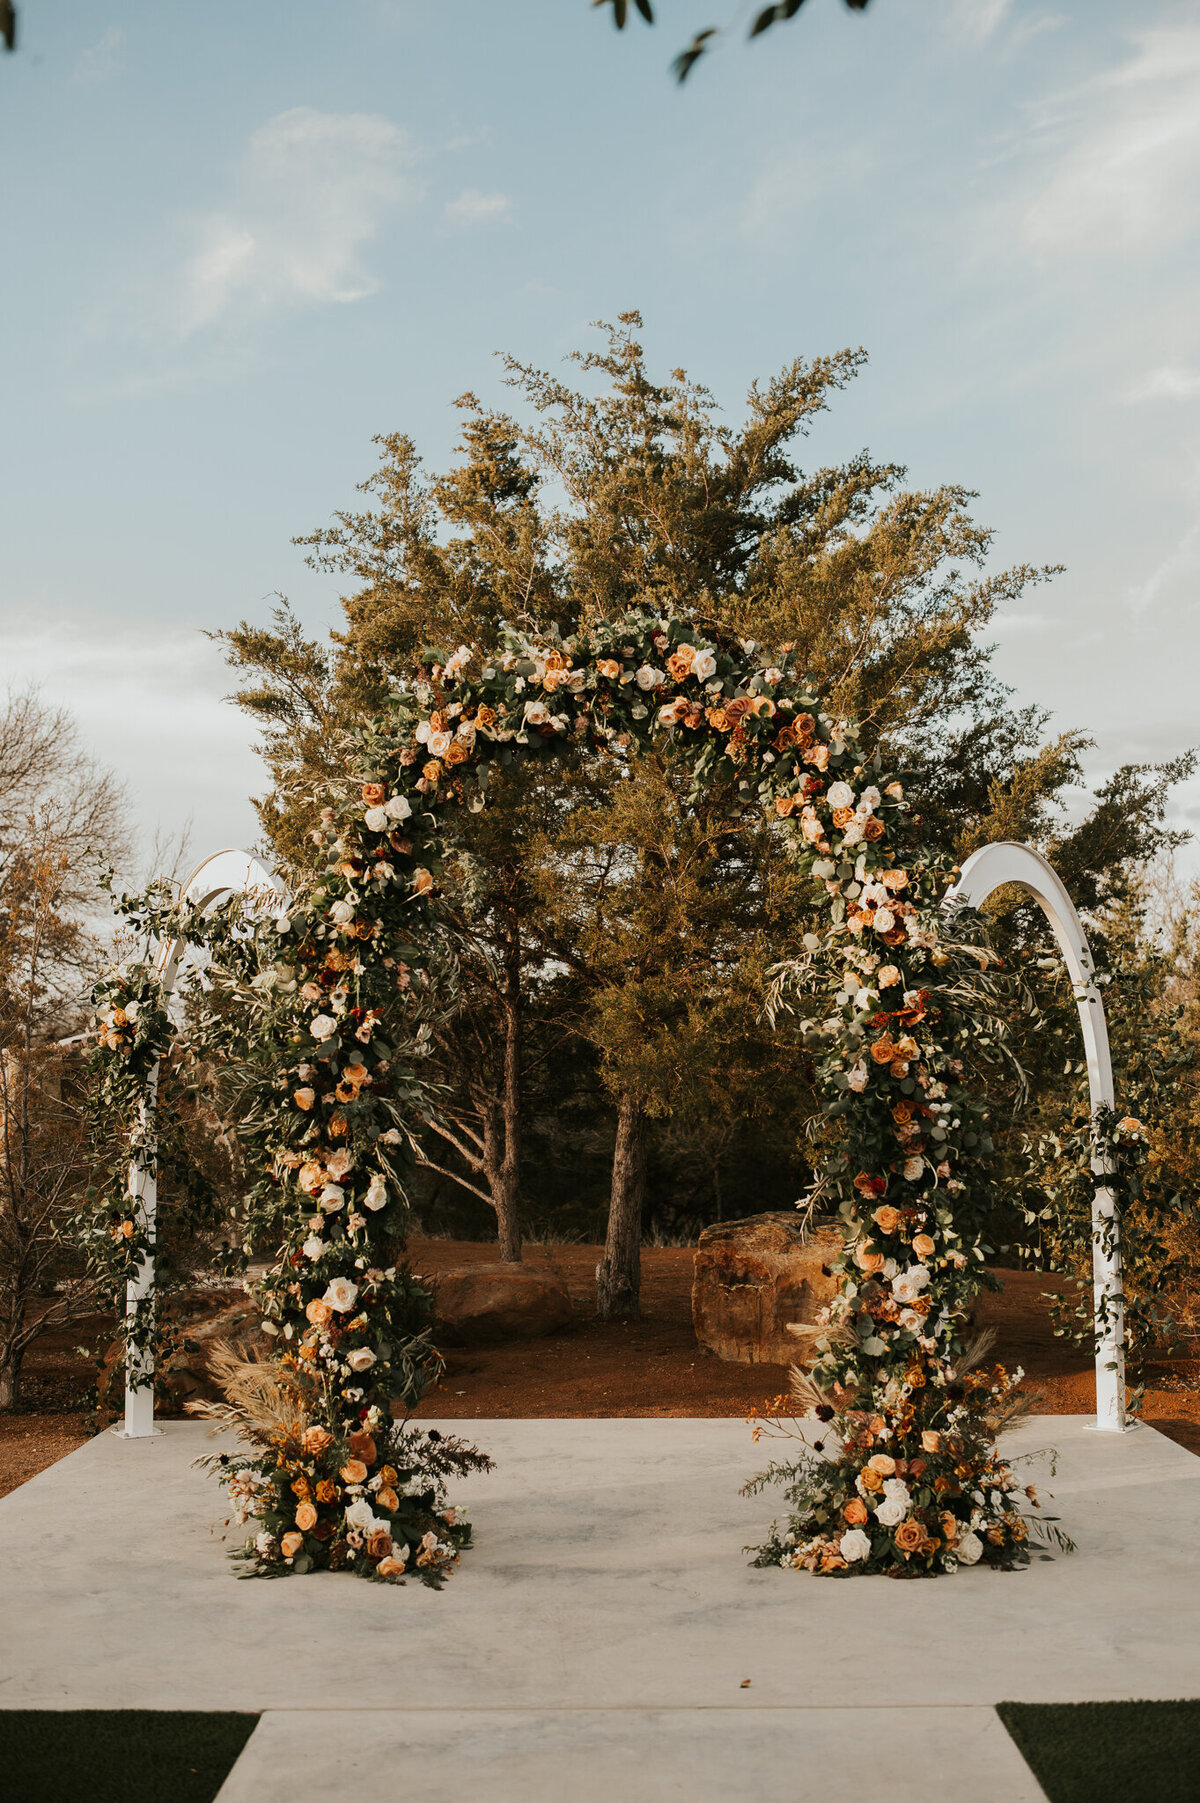 Close up view of the arches with floral arrangements